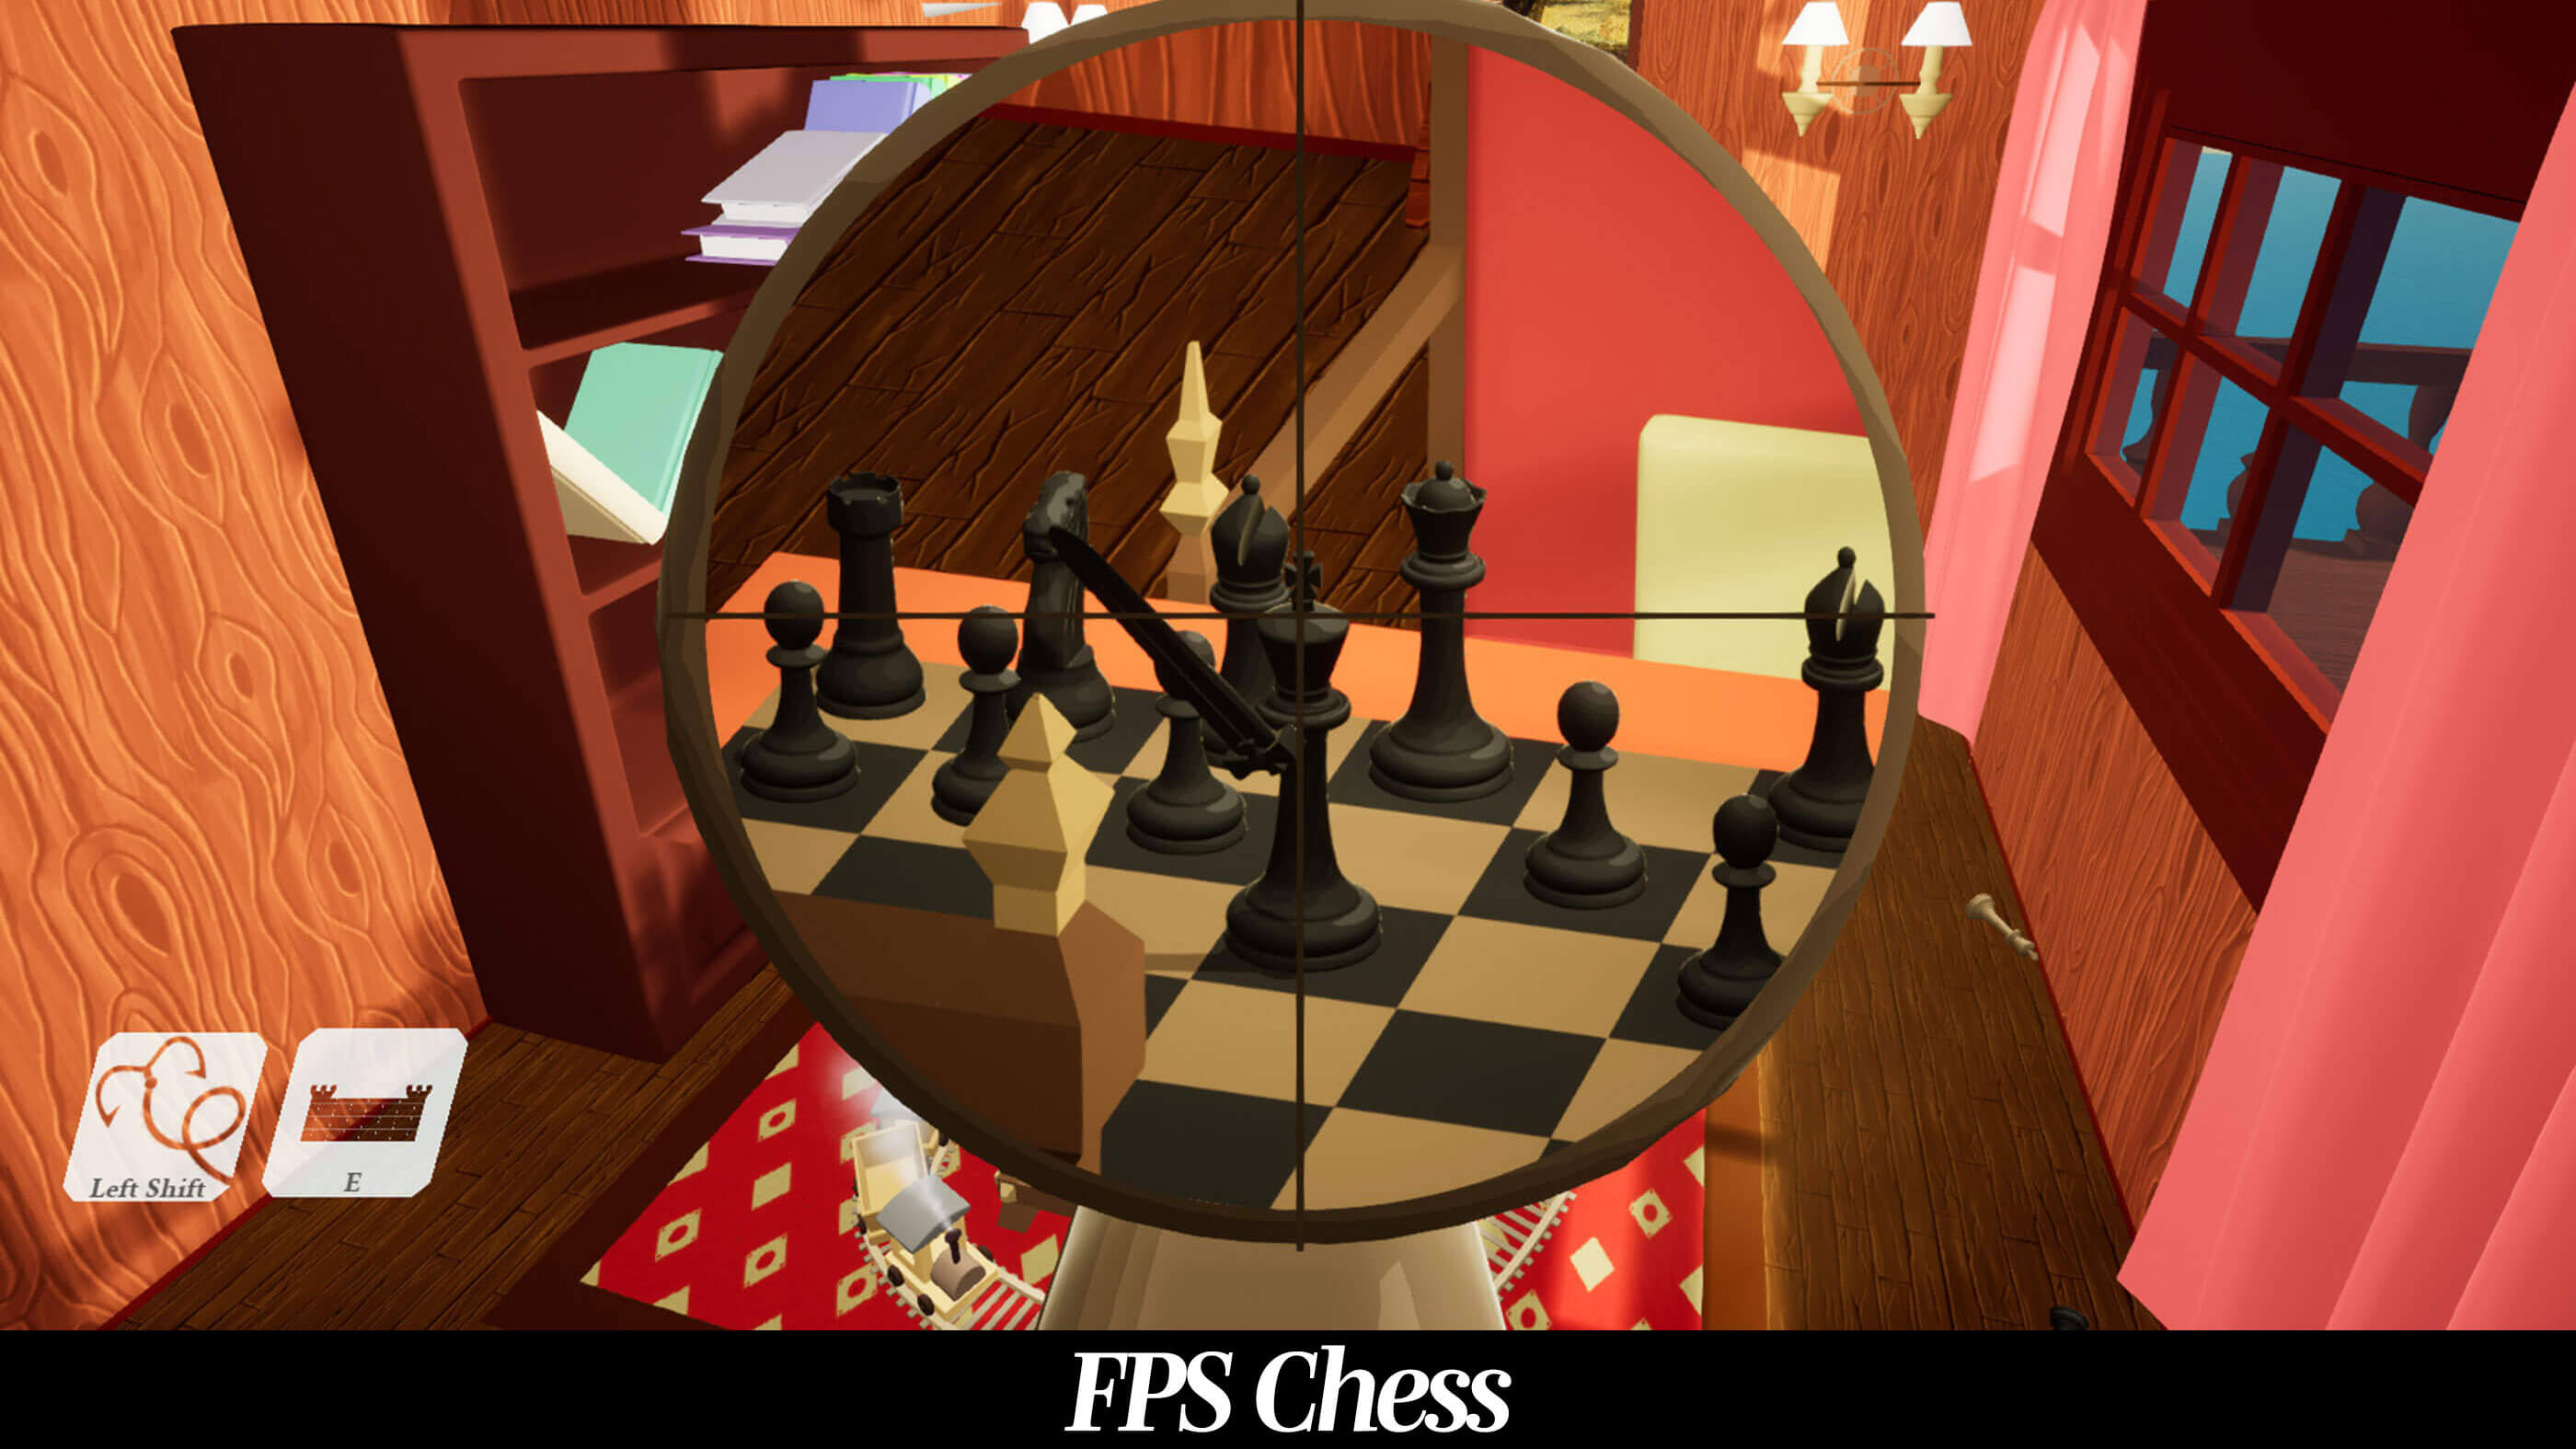 First-person view of a crosshair aiming at a chess piece on a chess board